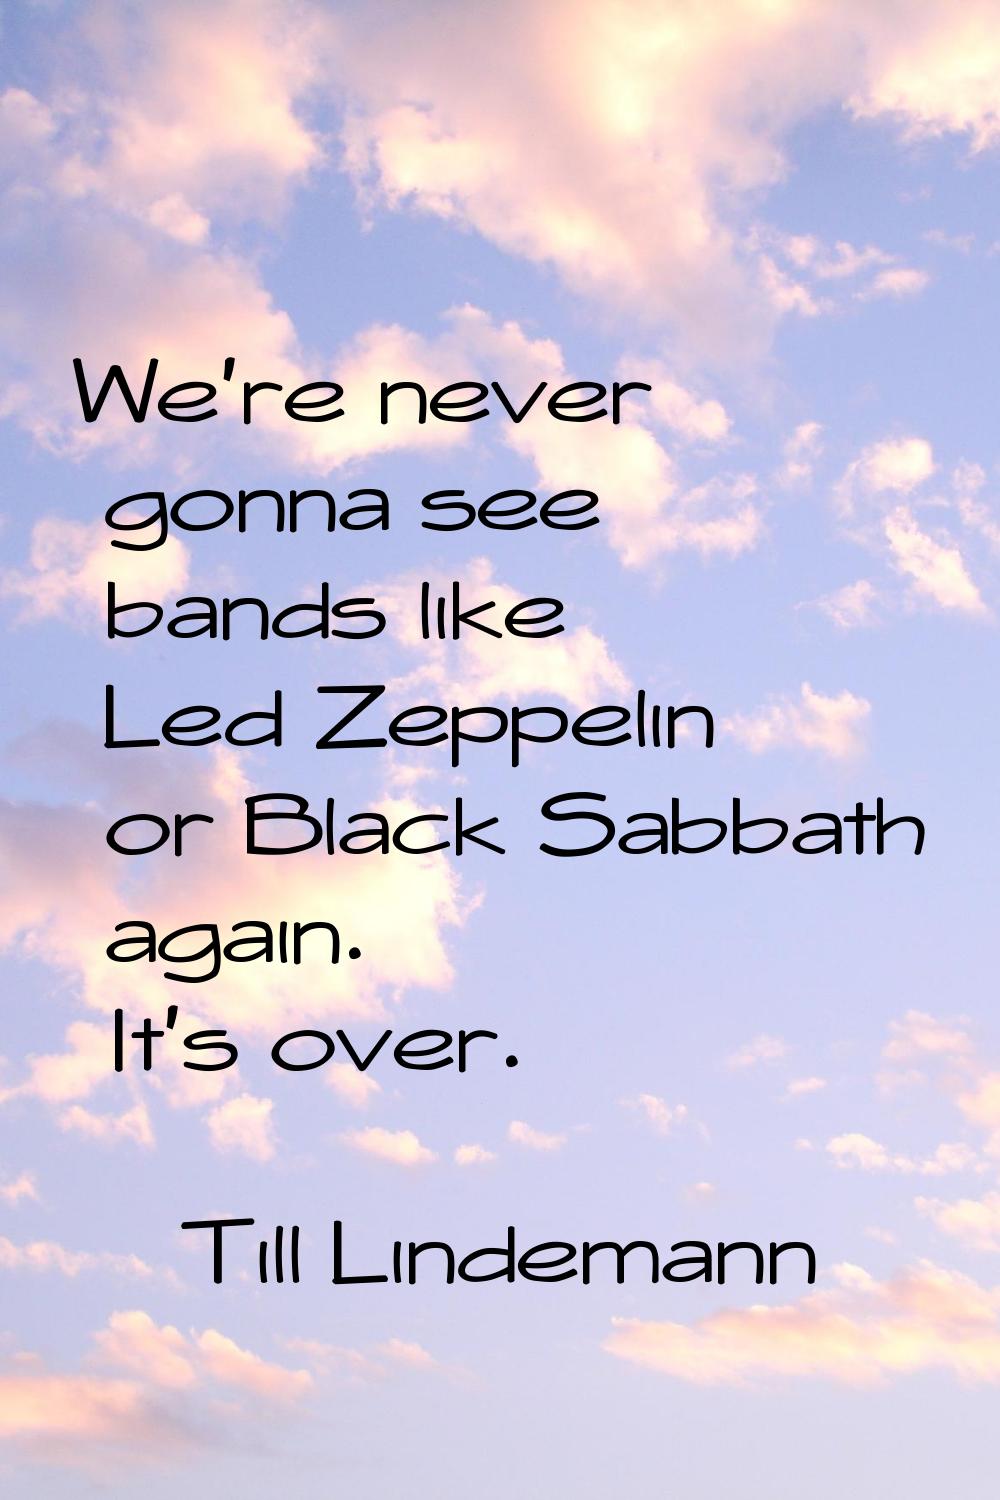 We're never gonna see bands like Led Zeppelin or Black Sabbath again. It's over.